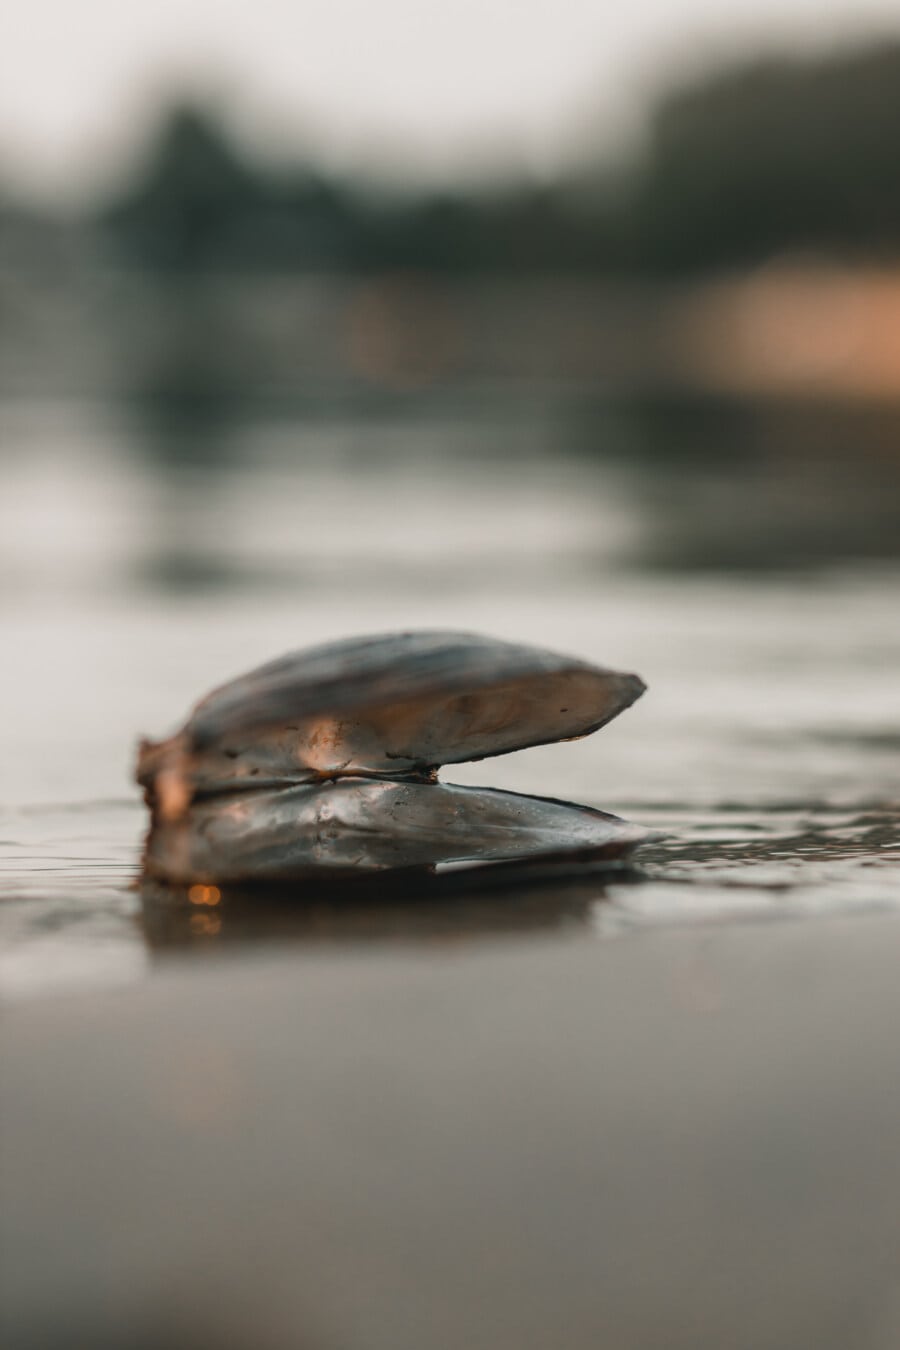 open, empty, mussel, close-up, riverbank, wet, reflection, nature, blur, water